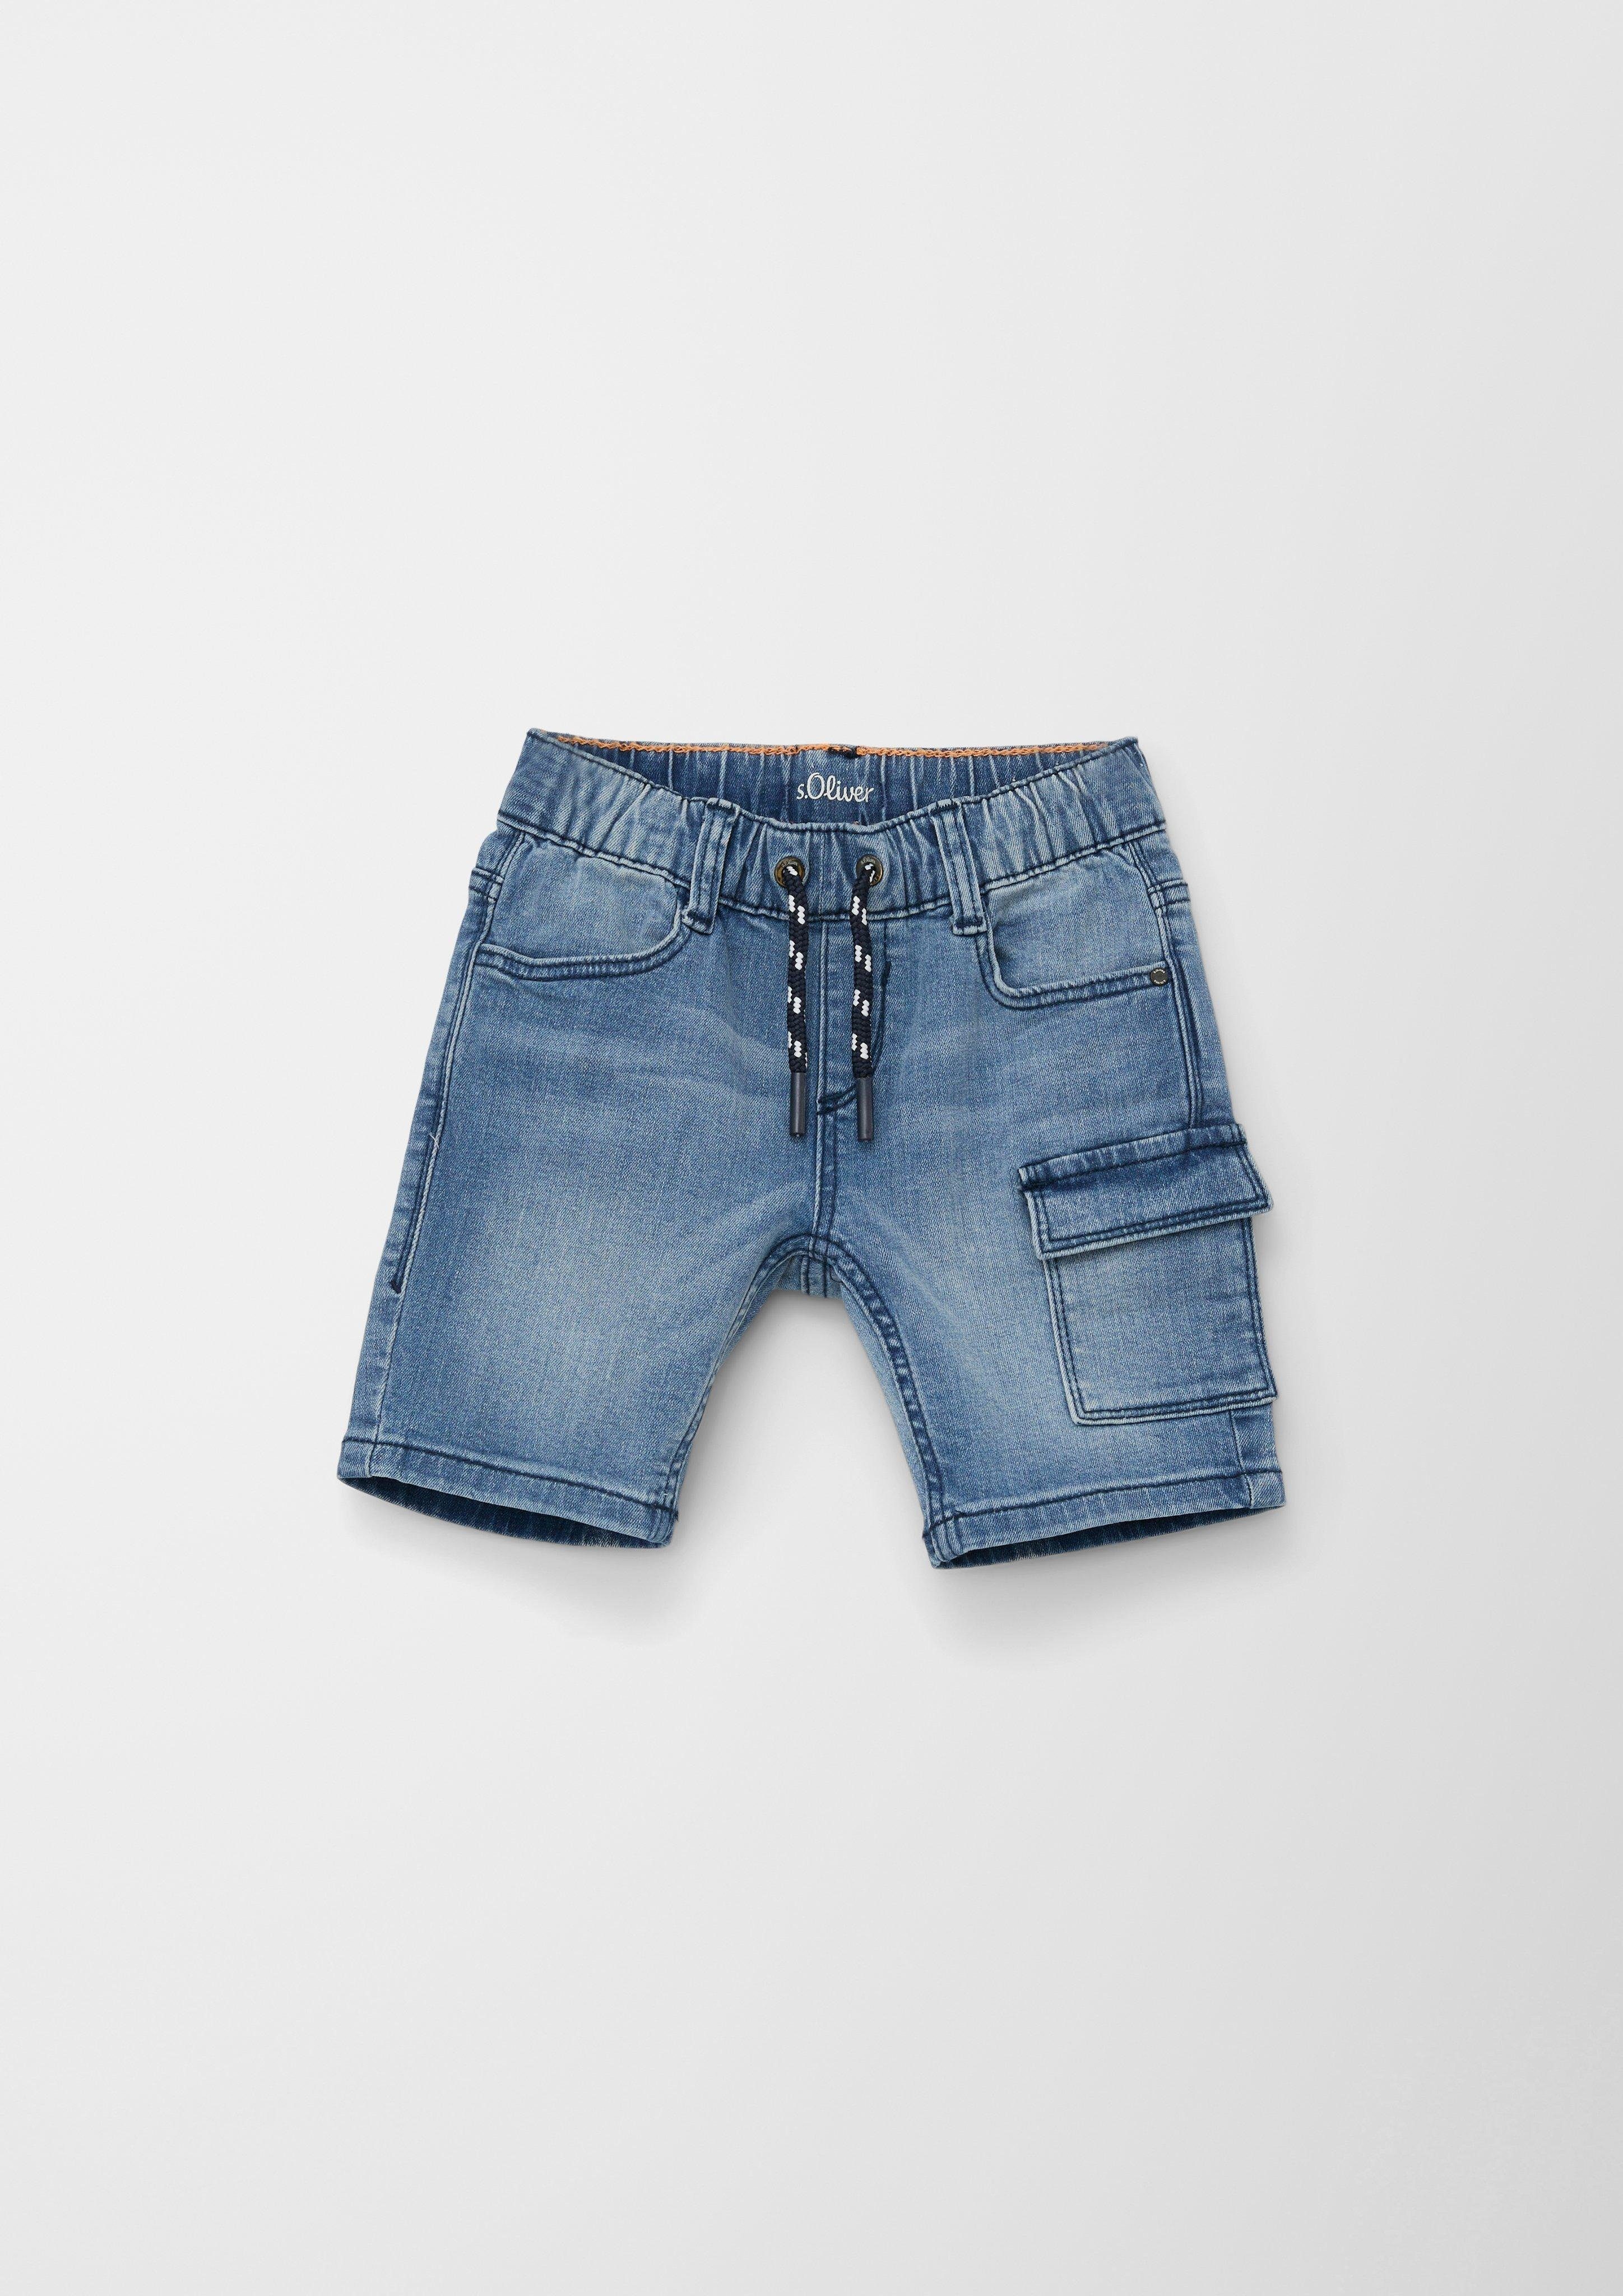 s.Oliver Jeansshorts Jeans-Bermuda Joggstyle Brad / Slim Fit / Mid Rise / Slim Leg angedeuteter Tunnelzug, Waschung